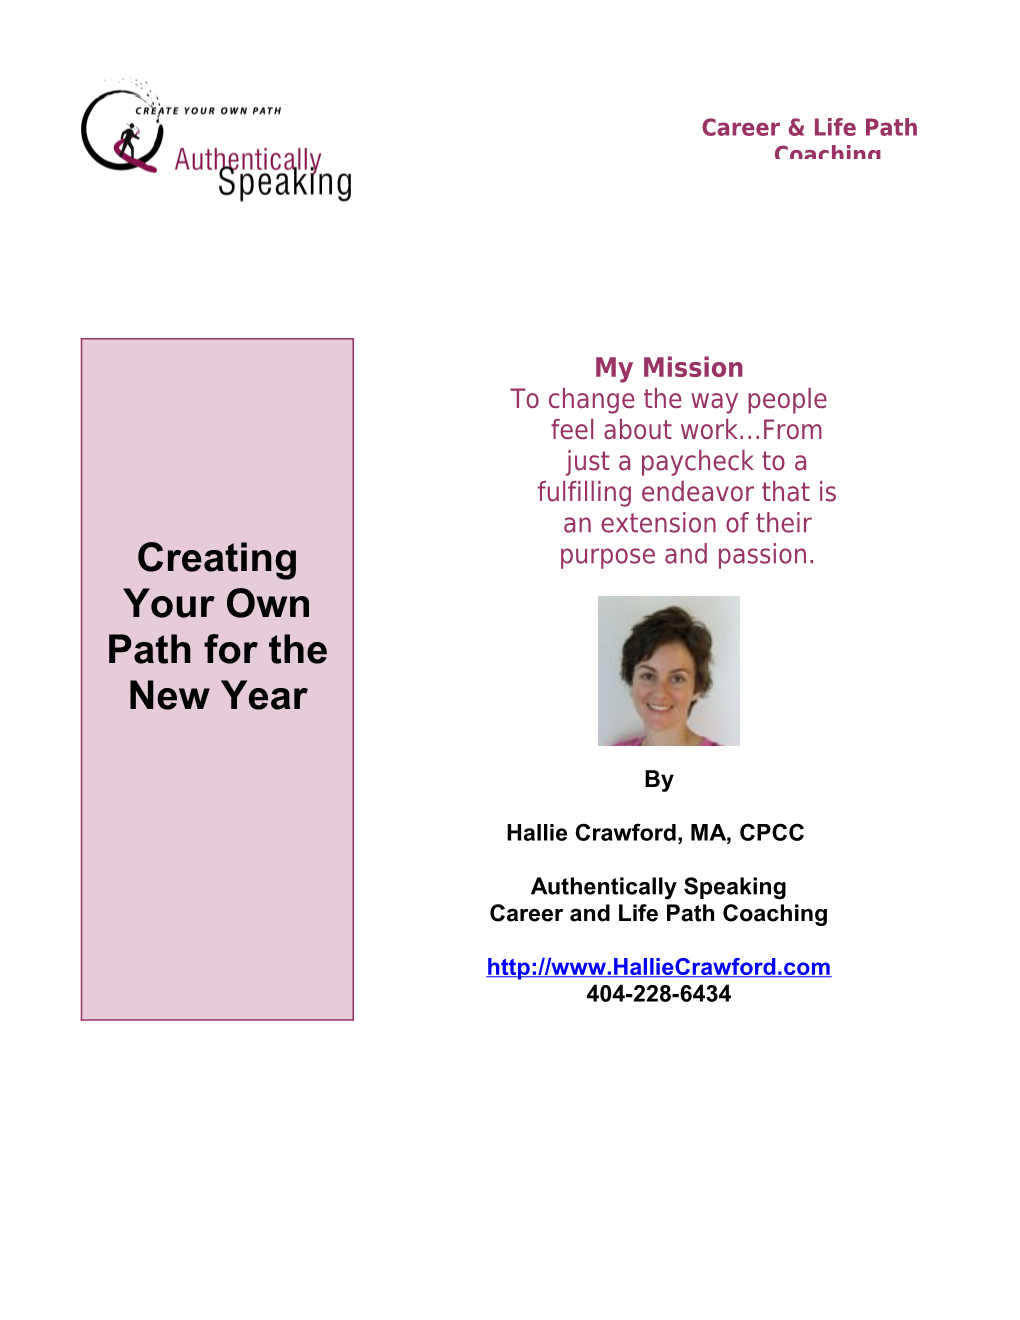 Creating Your Own Path for the New Year Hallie Crawford, MA, CPCC, Authentically Speaking